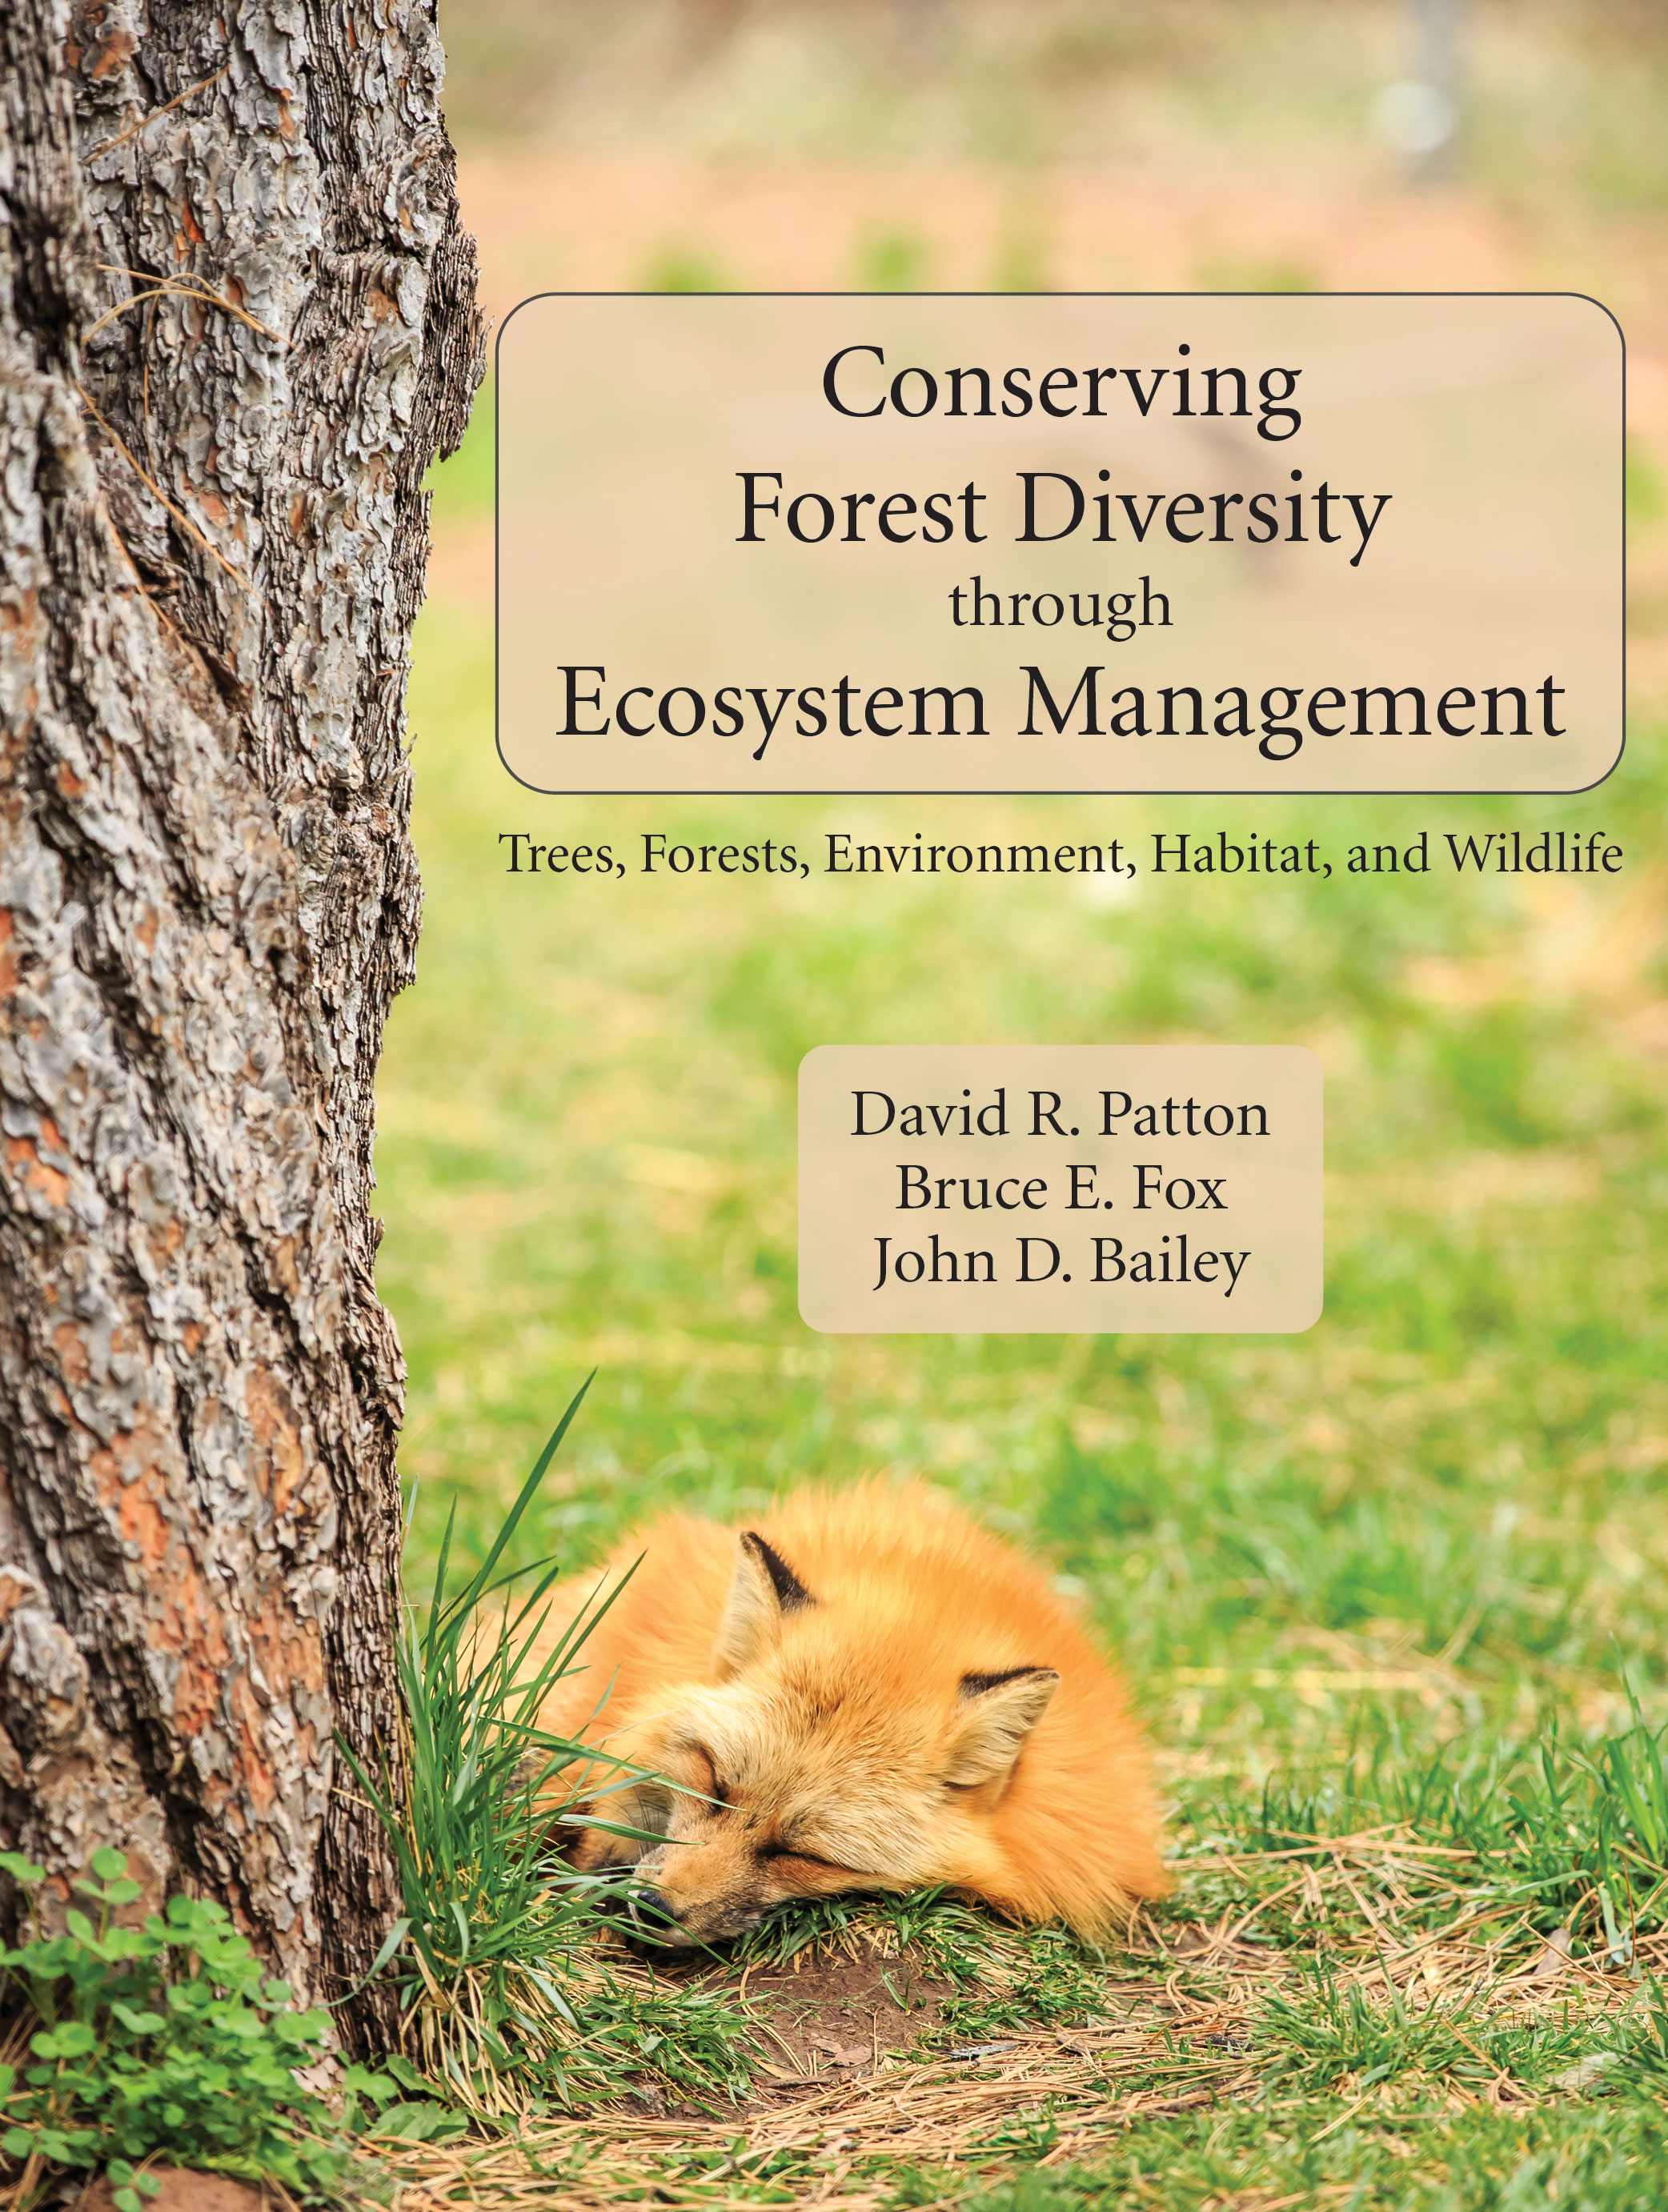 Conserving Forest Diversity through Ecosystem Management: Trees, Forests, Environment, Habitat, and Wildlife by David R. Patton, Bruce E. Fox, John D. Bailey